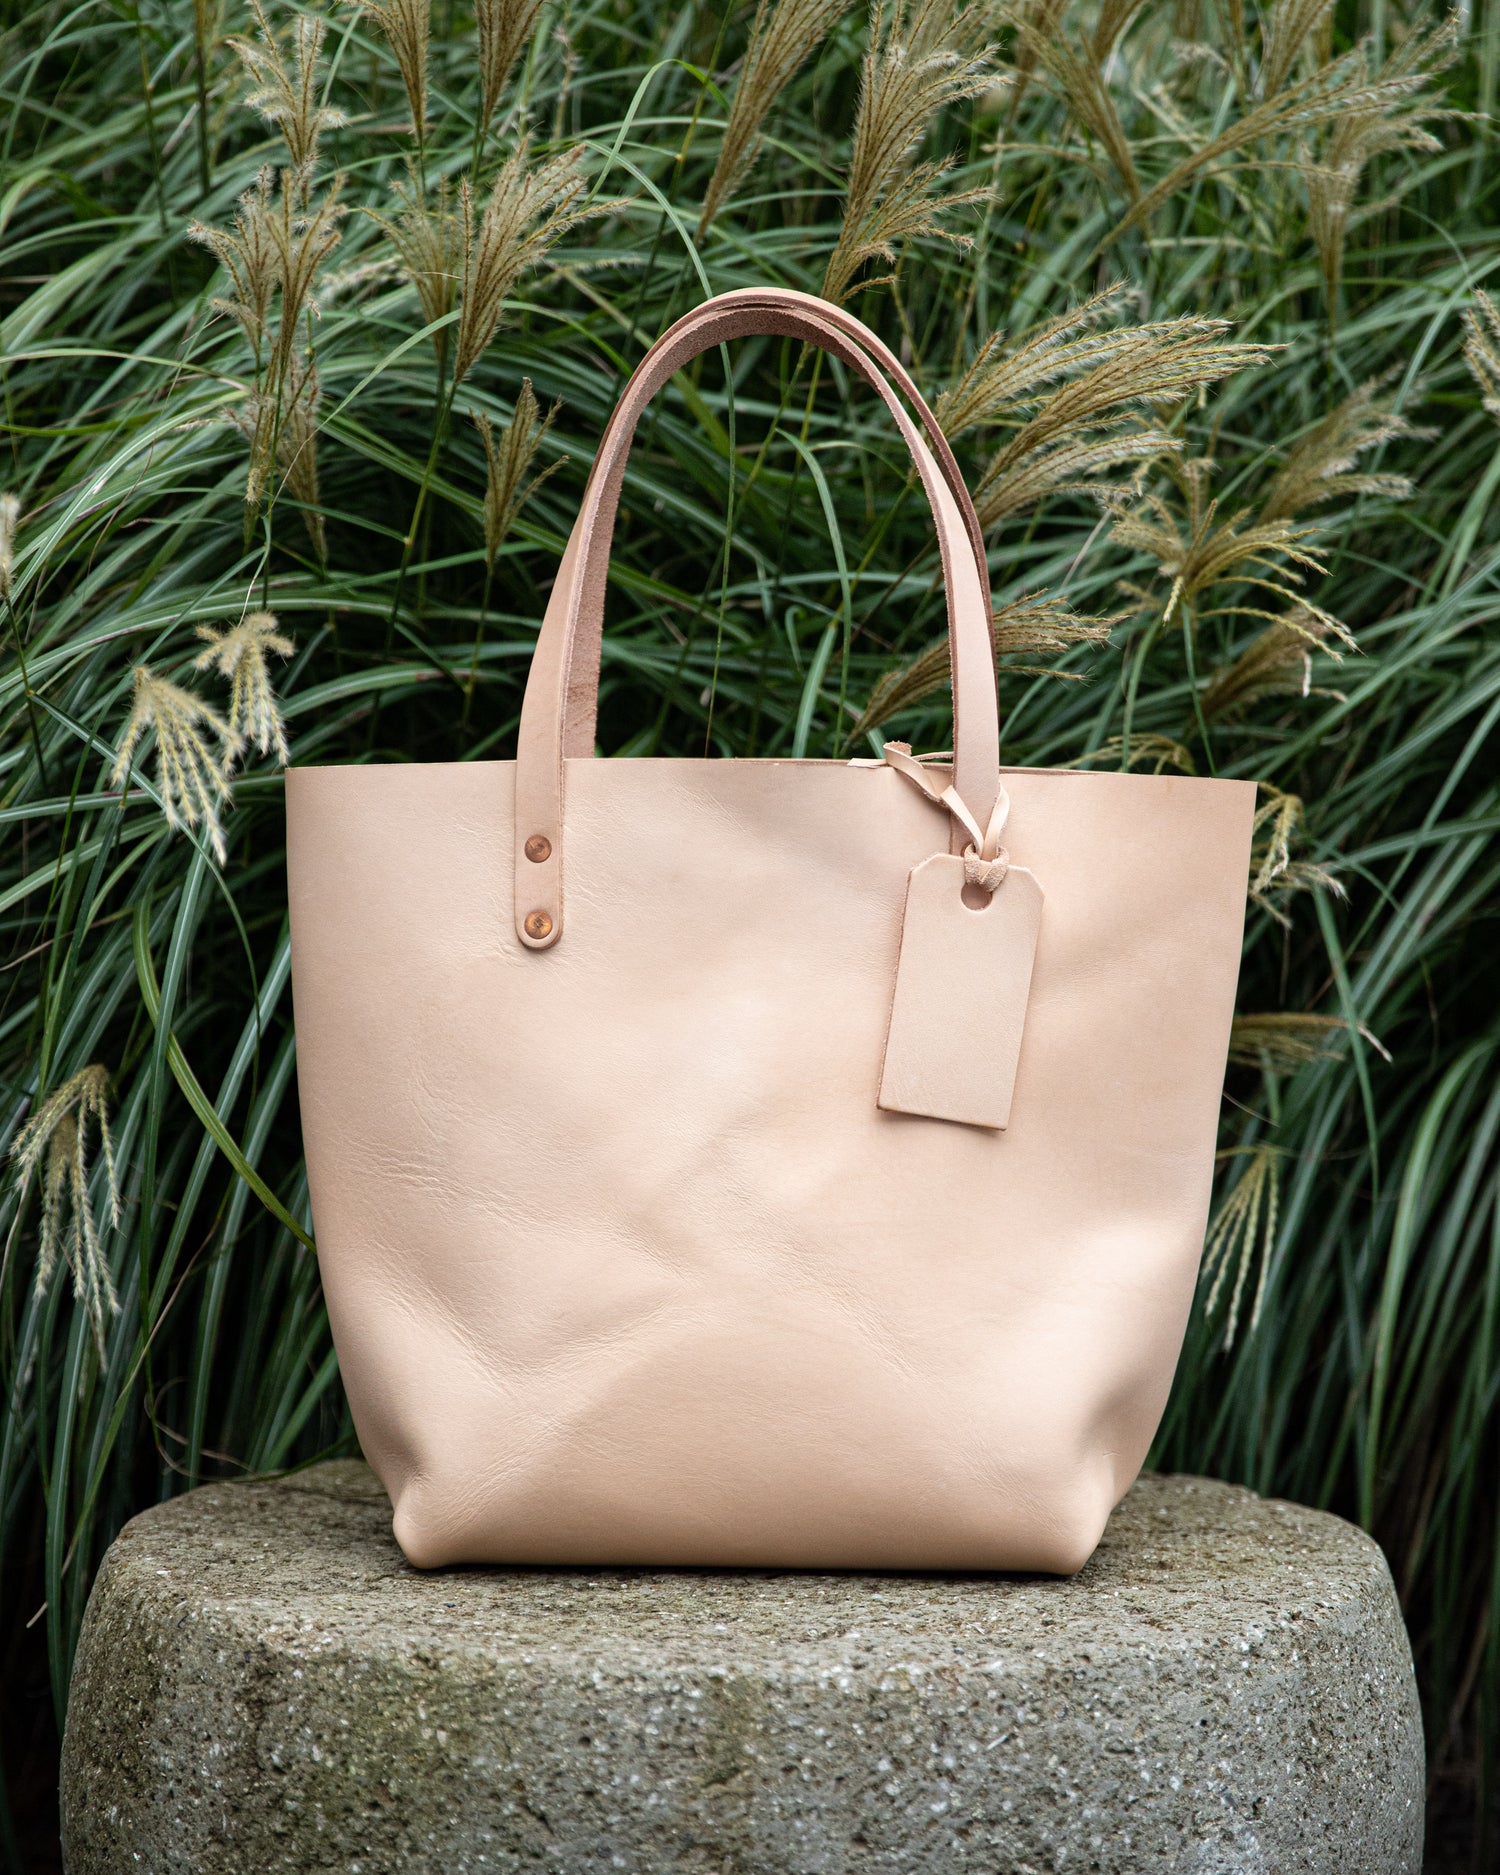 *Winner Drawn* Have You Heard? Win a Vegetable Tanned Tote!